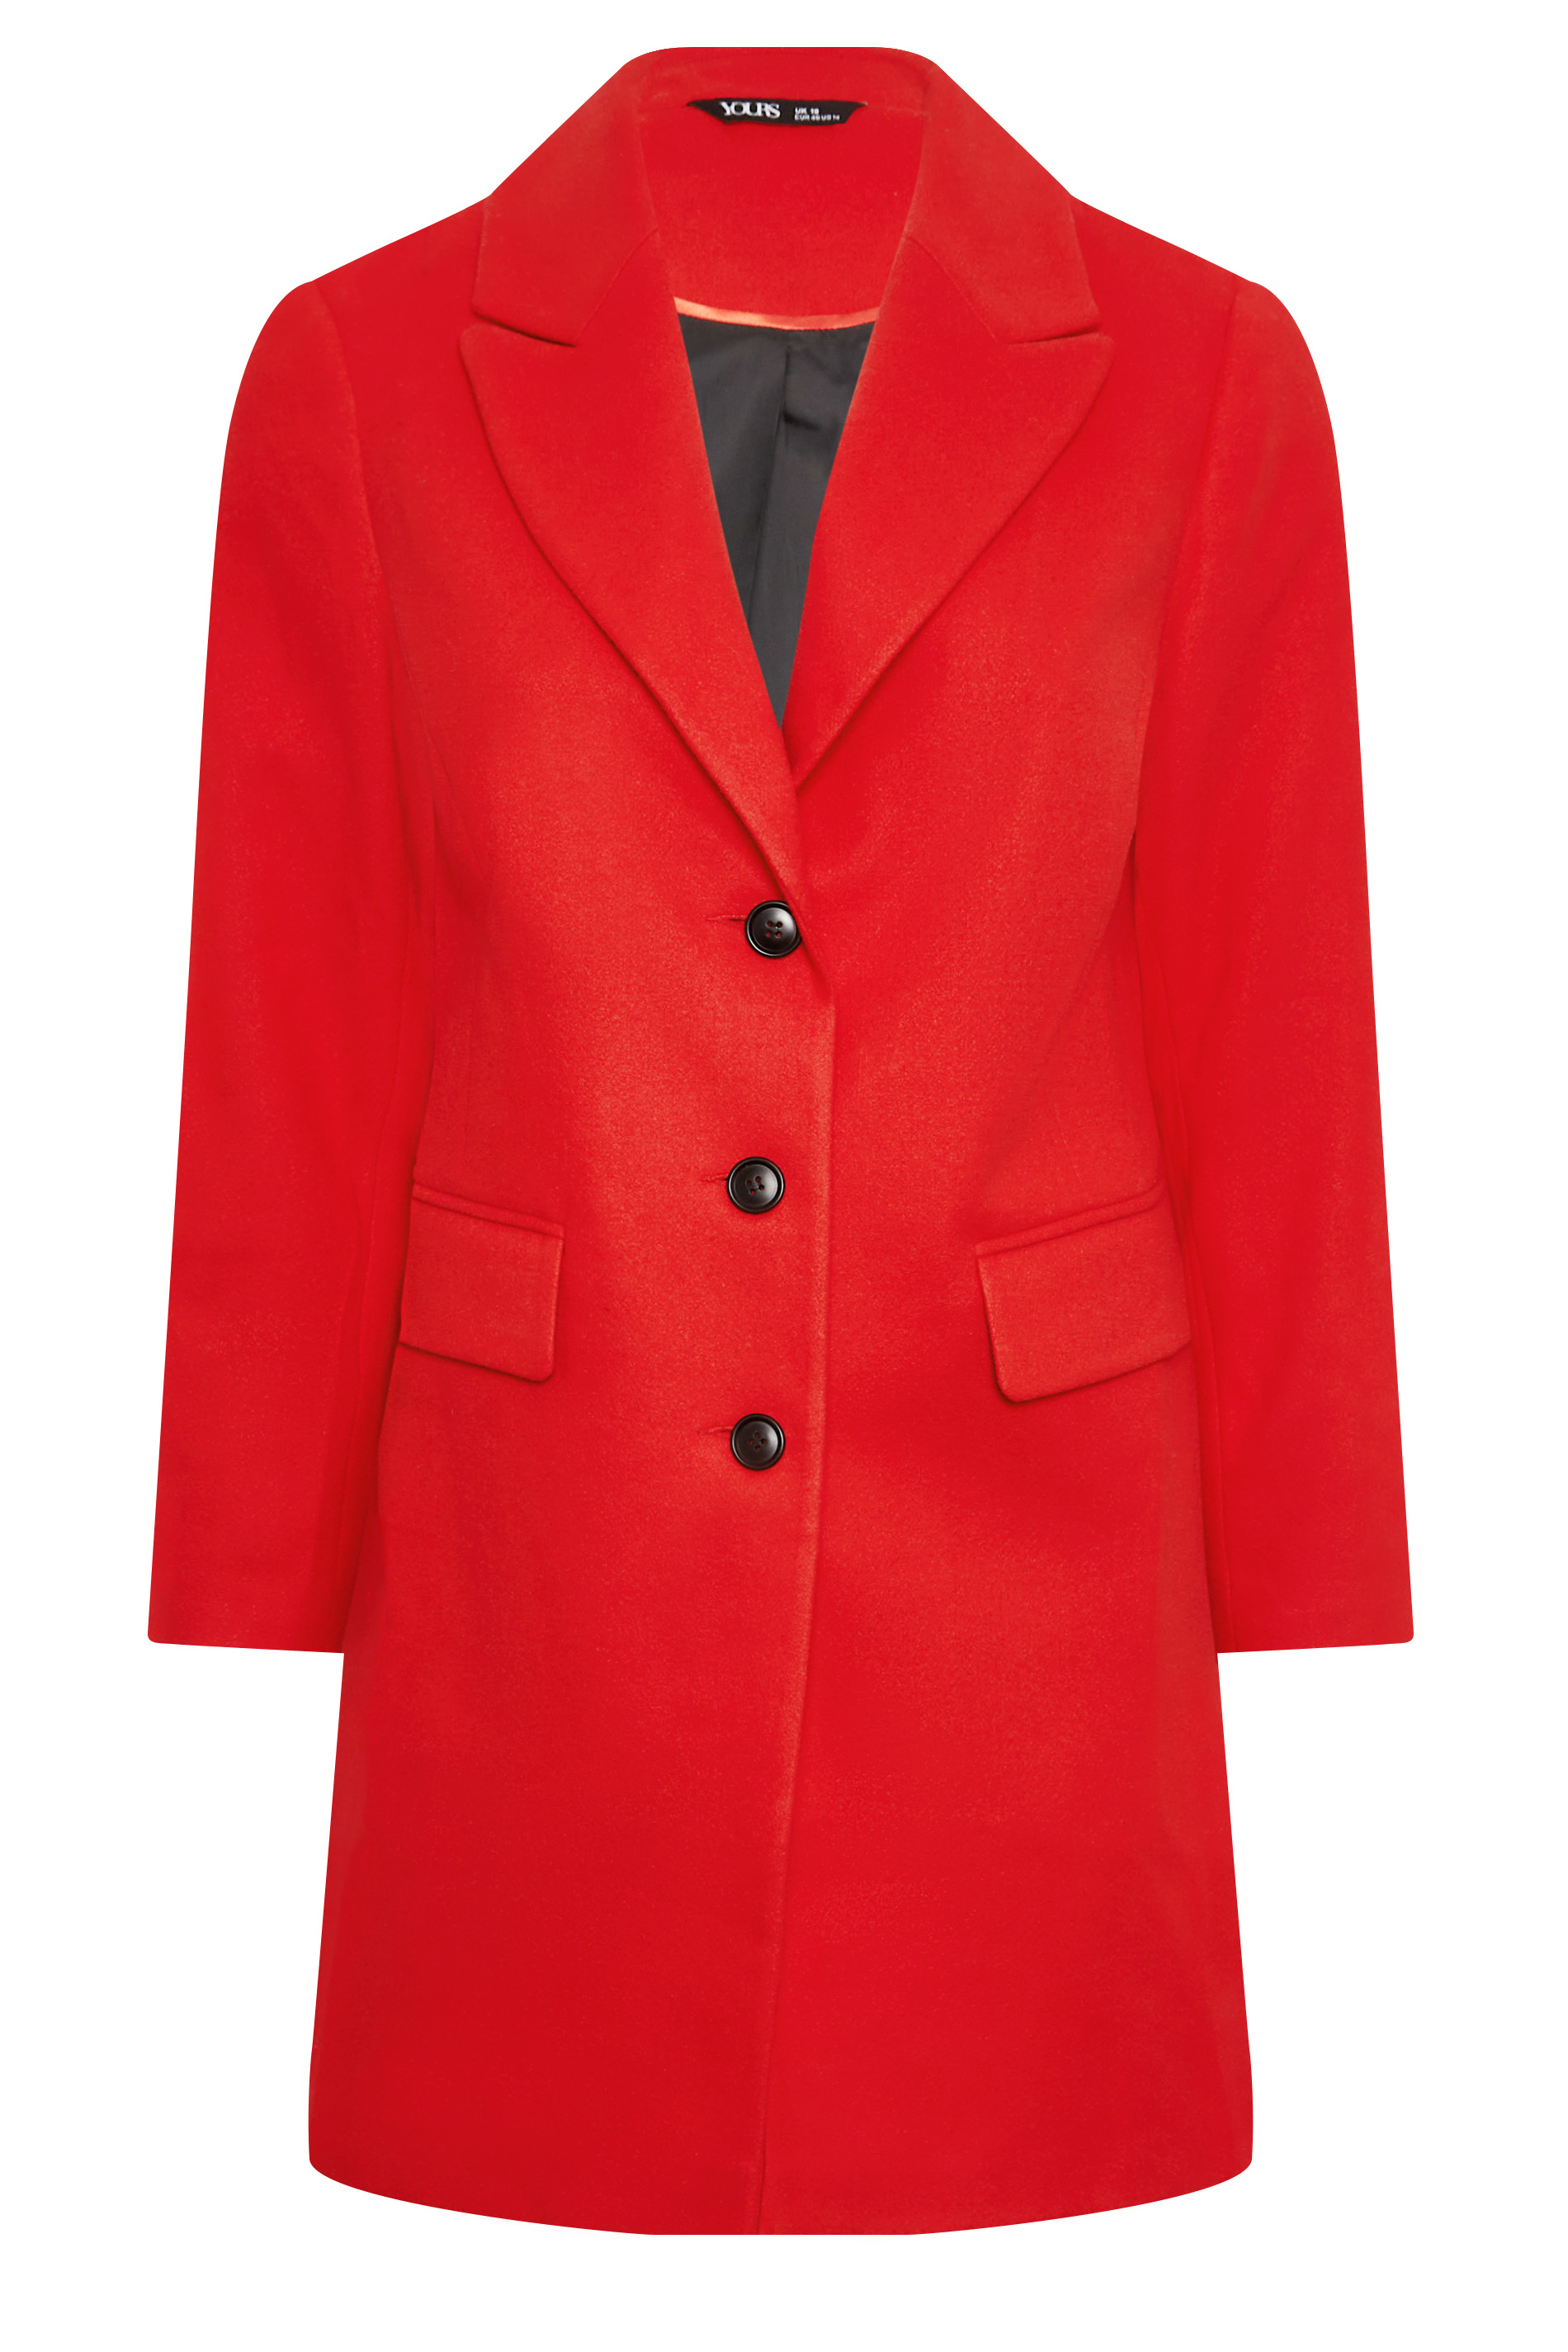 YOURS Plus Size Red Midi Formal Coat | Yours Clothing